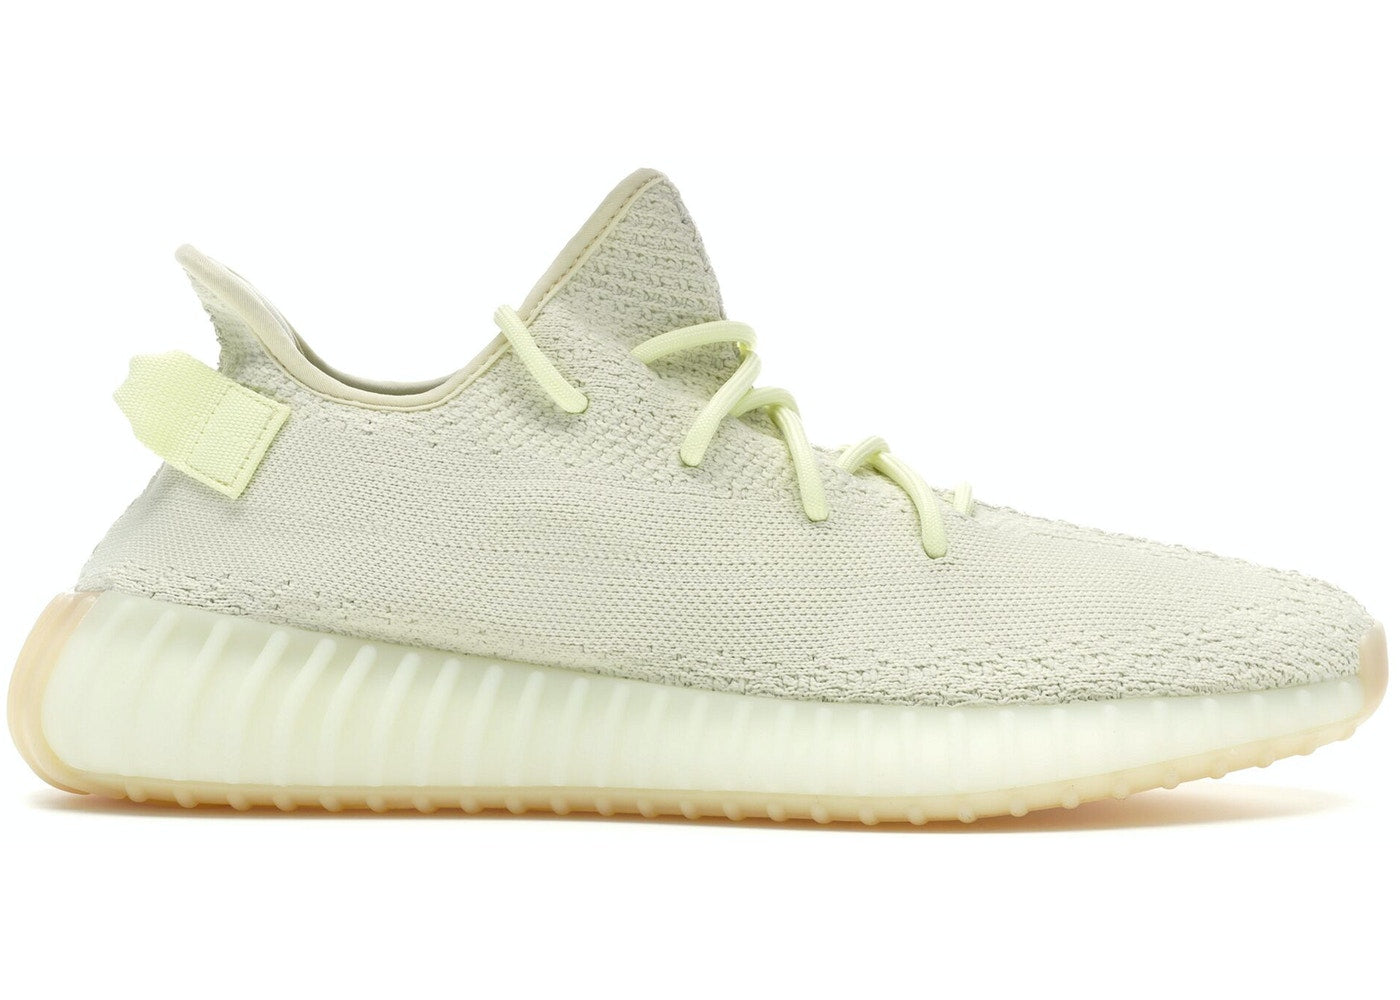 Adidas Yeezy Boost 350 "Butter" (USED)